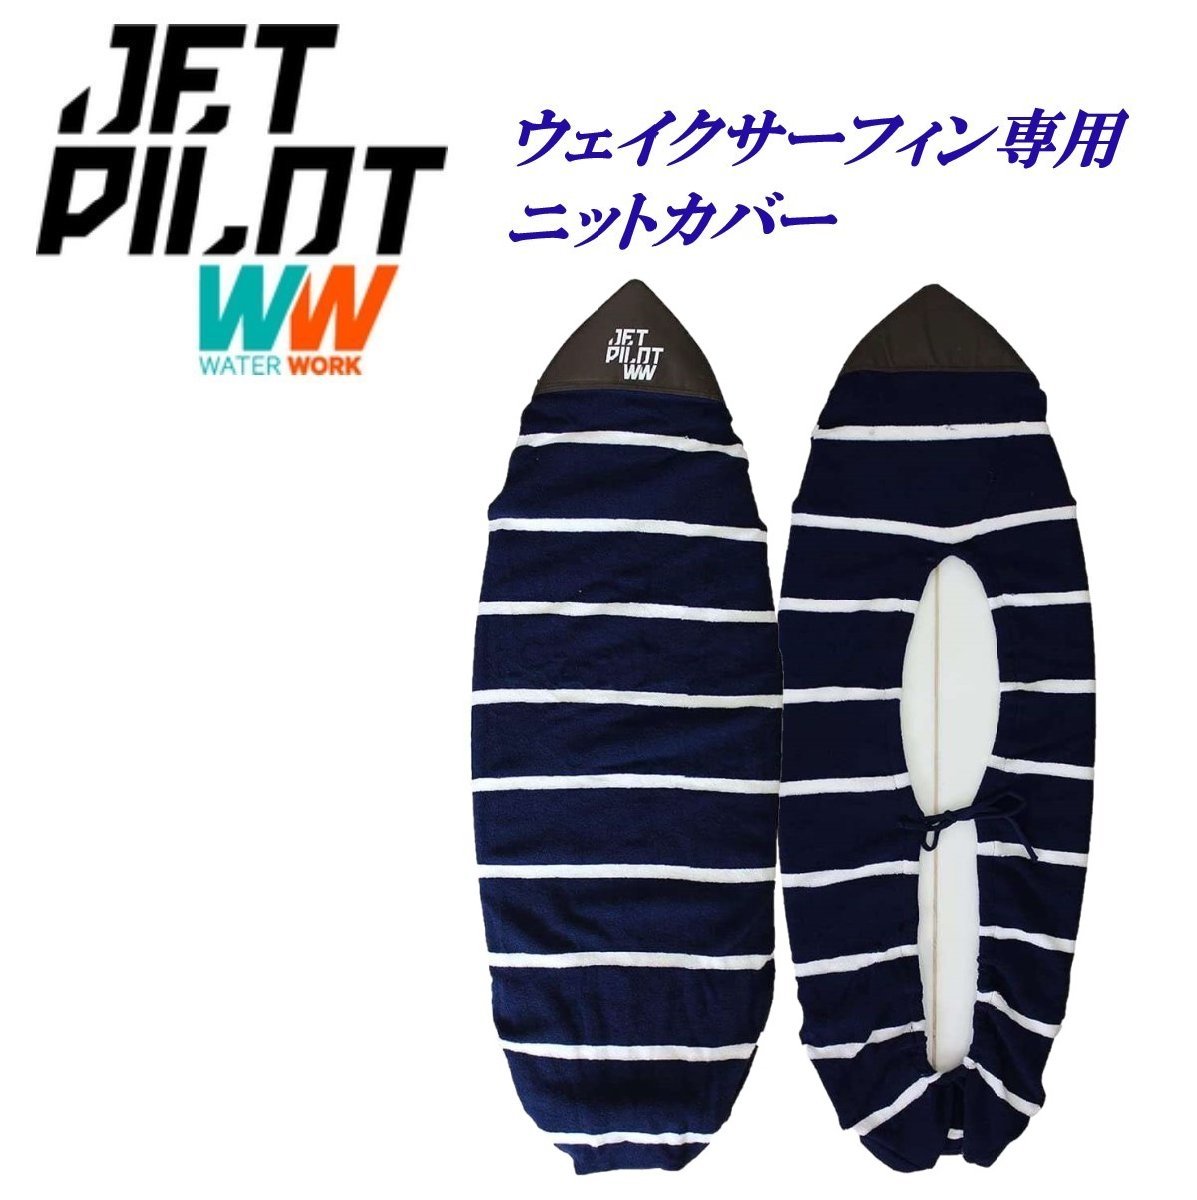 Jet Pilot Jetpilot Wake Surfin Exclusive Cover Free Shipping The Dit Cover Deck Cover JJP21910 ВМС